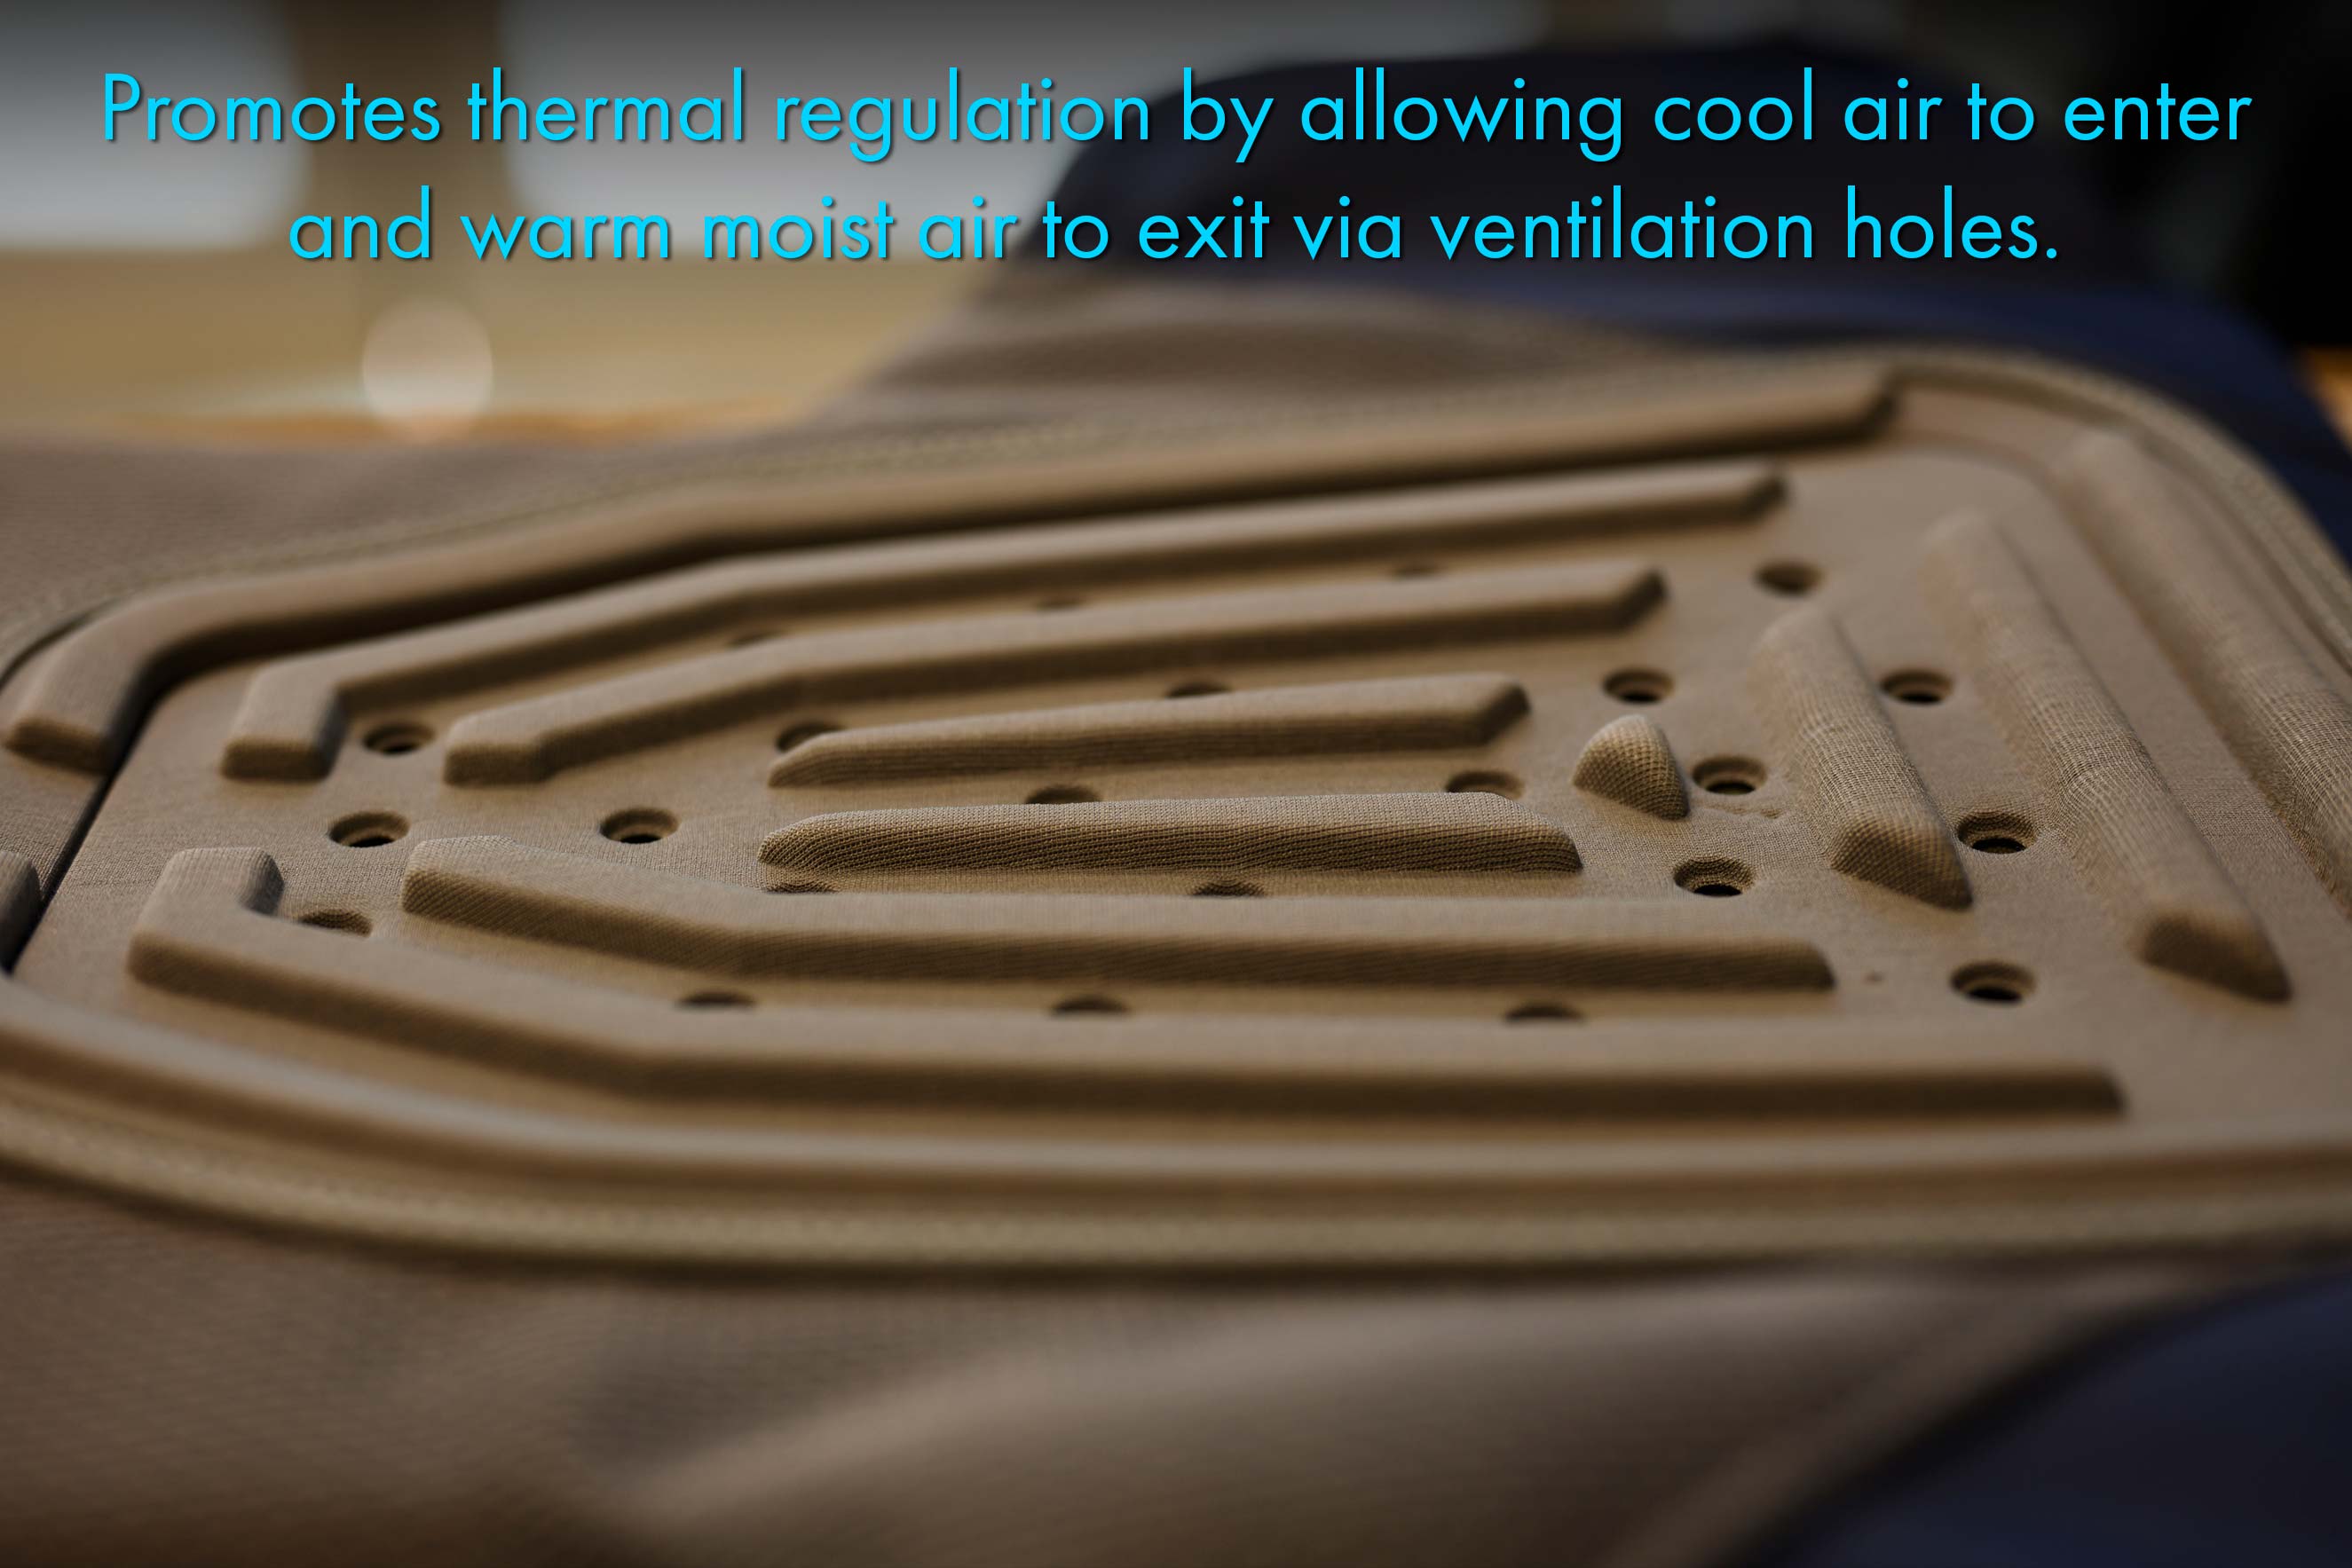 promotes thermal regulation by allowing cool air to enter and warm moist air to exit via ventilation holes